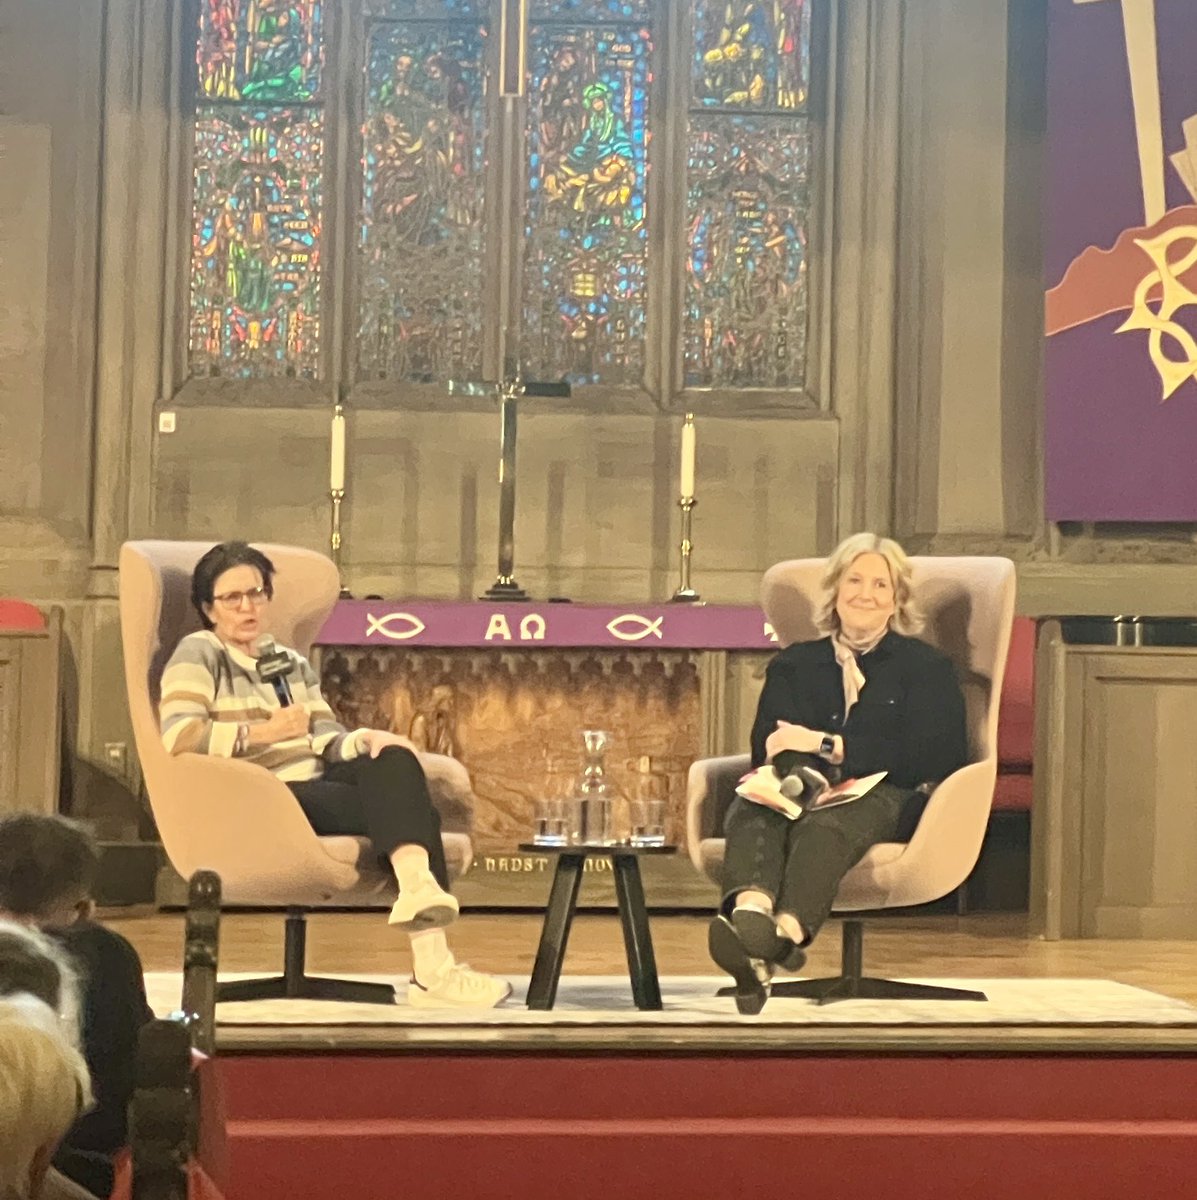 Didn’t plan on going to church this year, but it was worth it for @karaswisher and @BreneBrown in conversation. @chihumanities